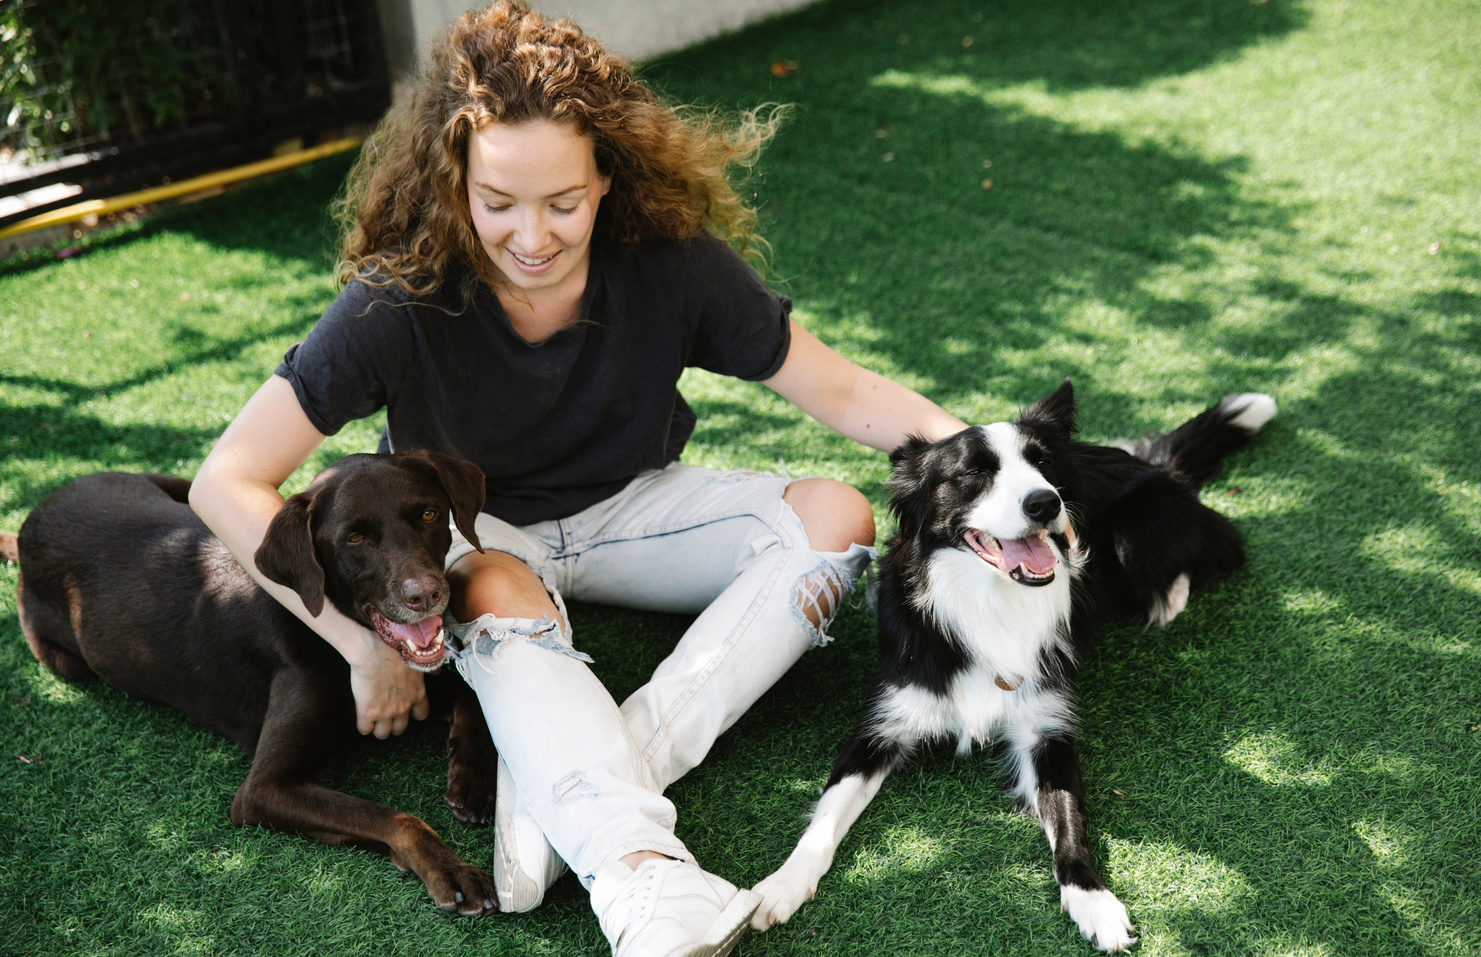 Smiling woman embracing purebred dogs on lawn